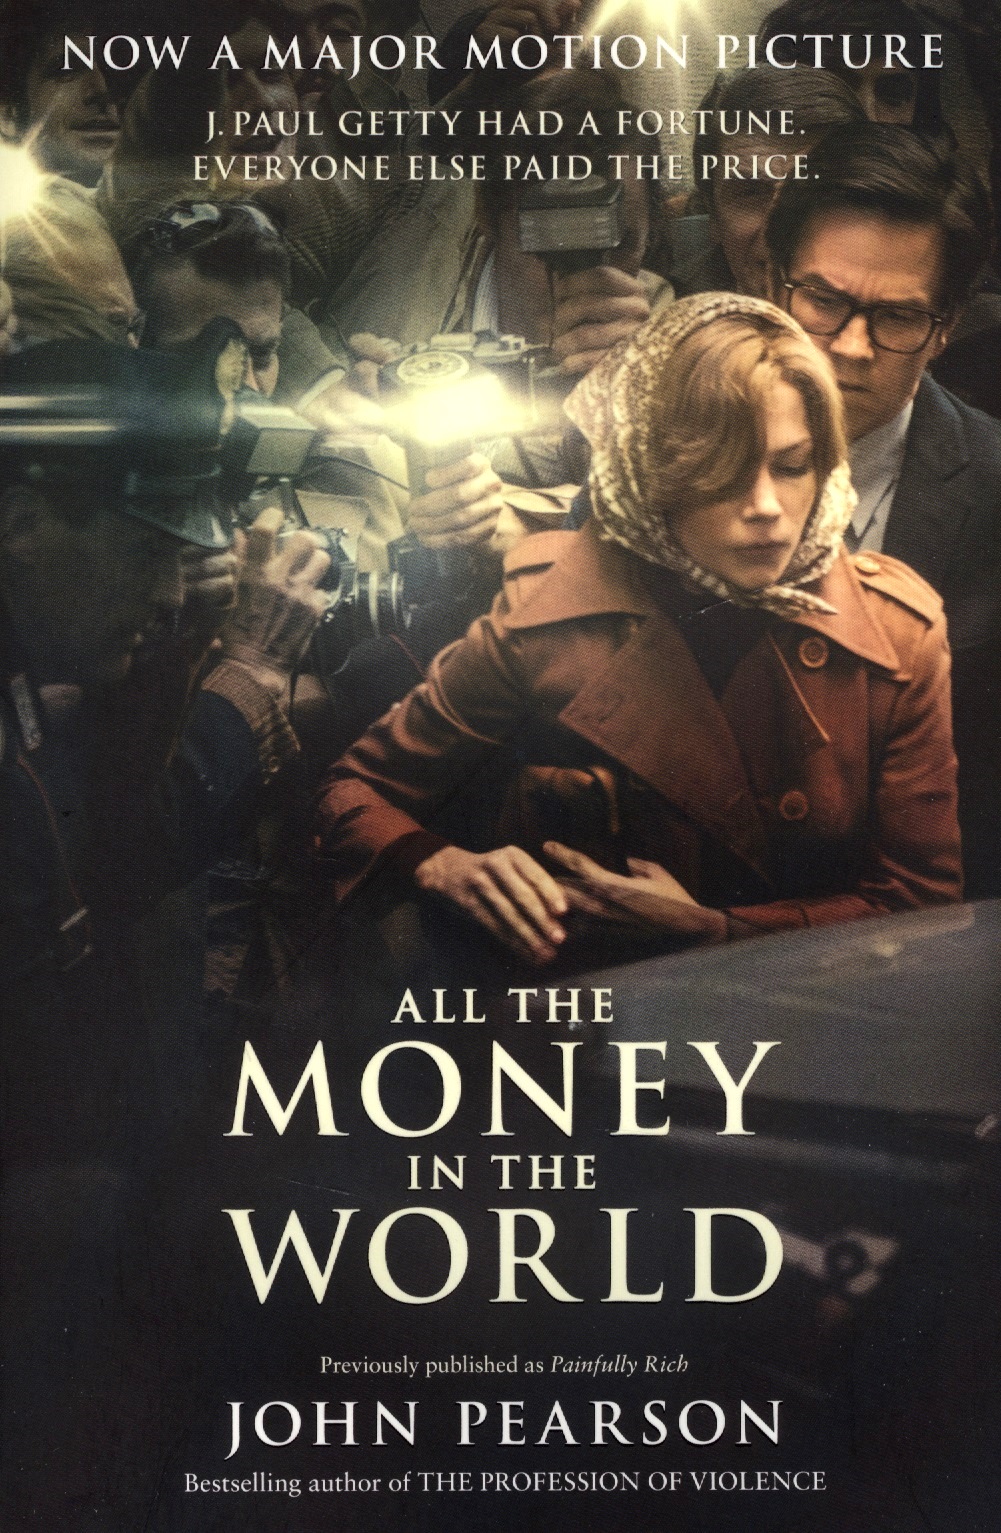 All the Money in the World fitzgerald sarah moore all the money in the world